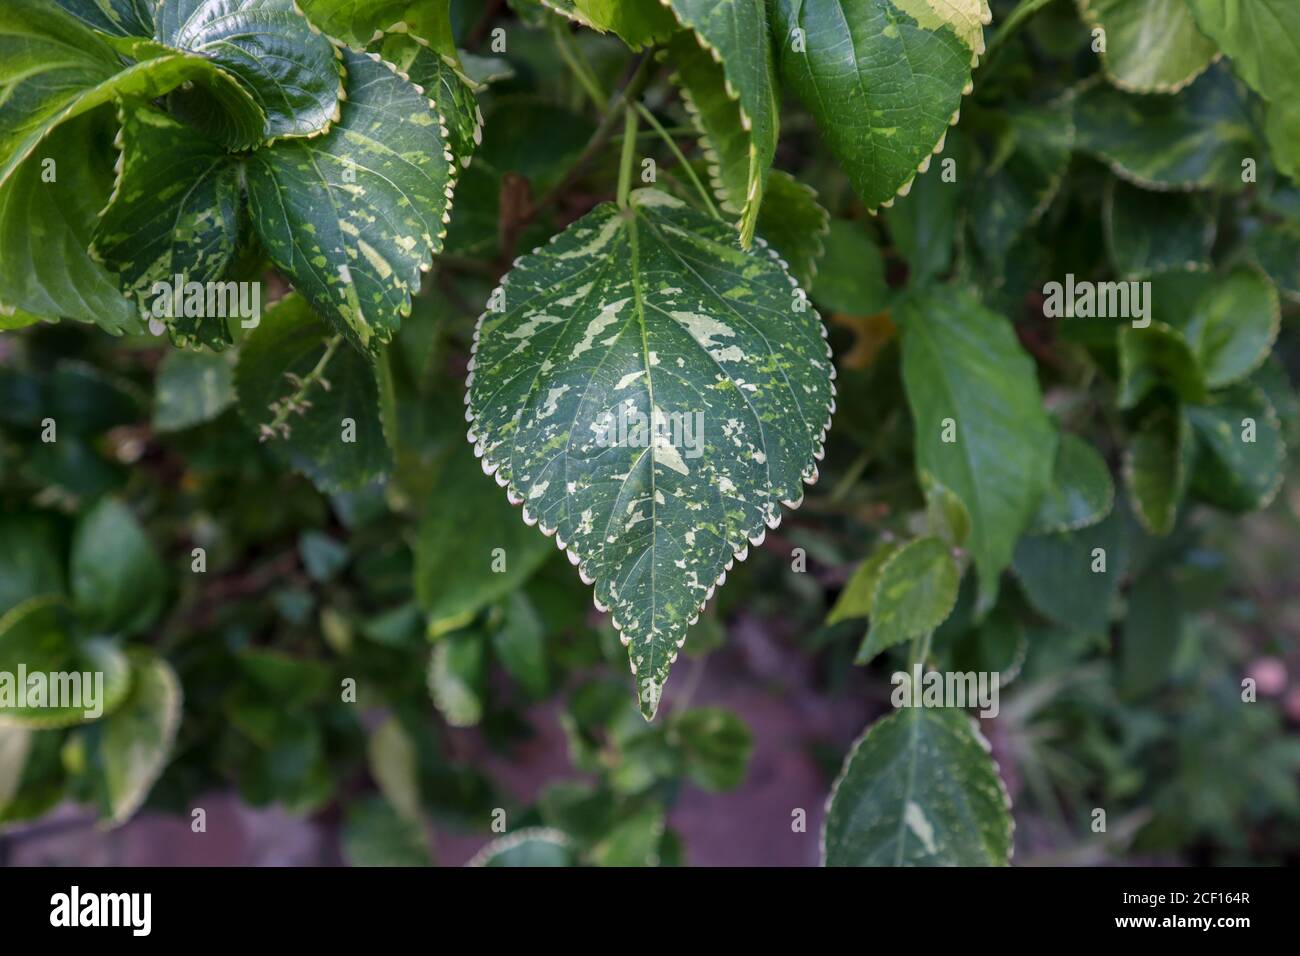 Unique green leaf with white dots. Beautiful isolated green leaf. Stock Photo